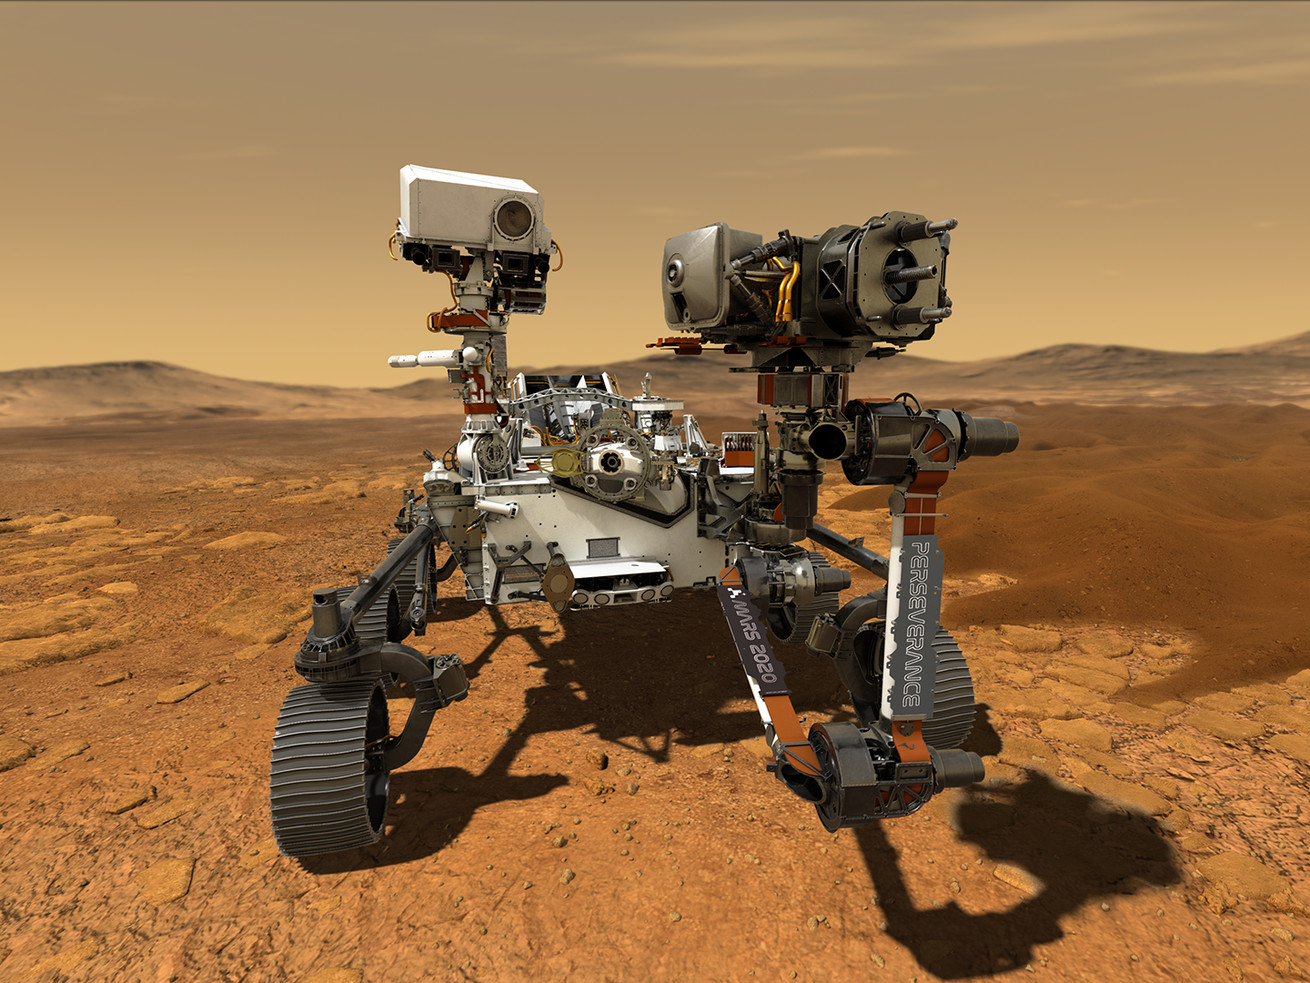 An artist’s rendering of the Perseverance rover on Mars.